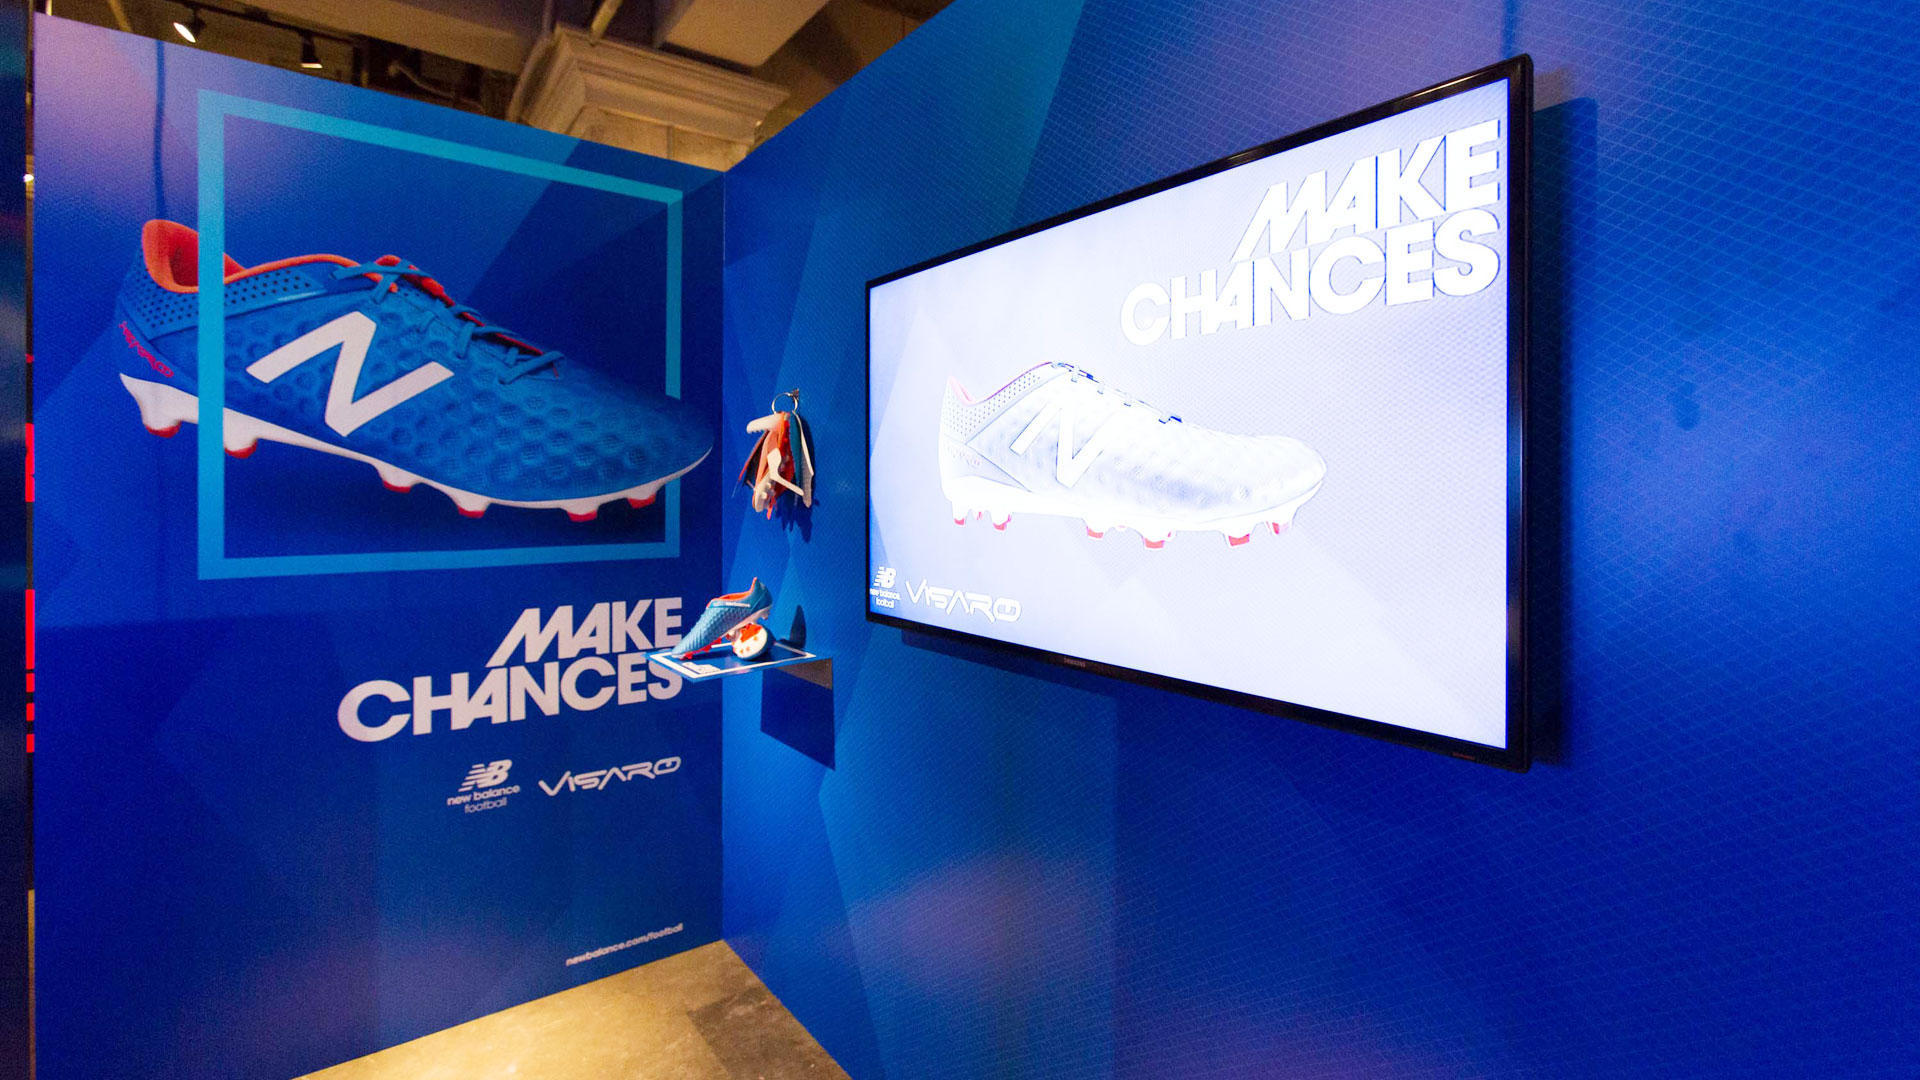 New Balance Japan Footbal Spiked Shoes Launch Event 株式会社ブーマー